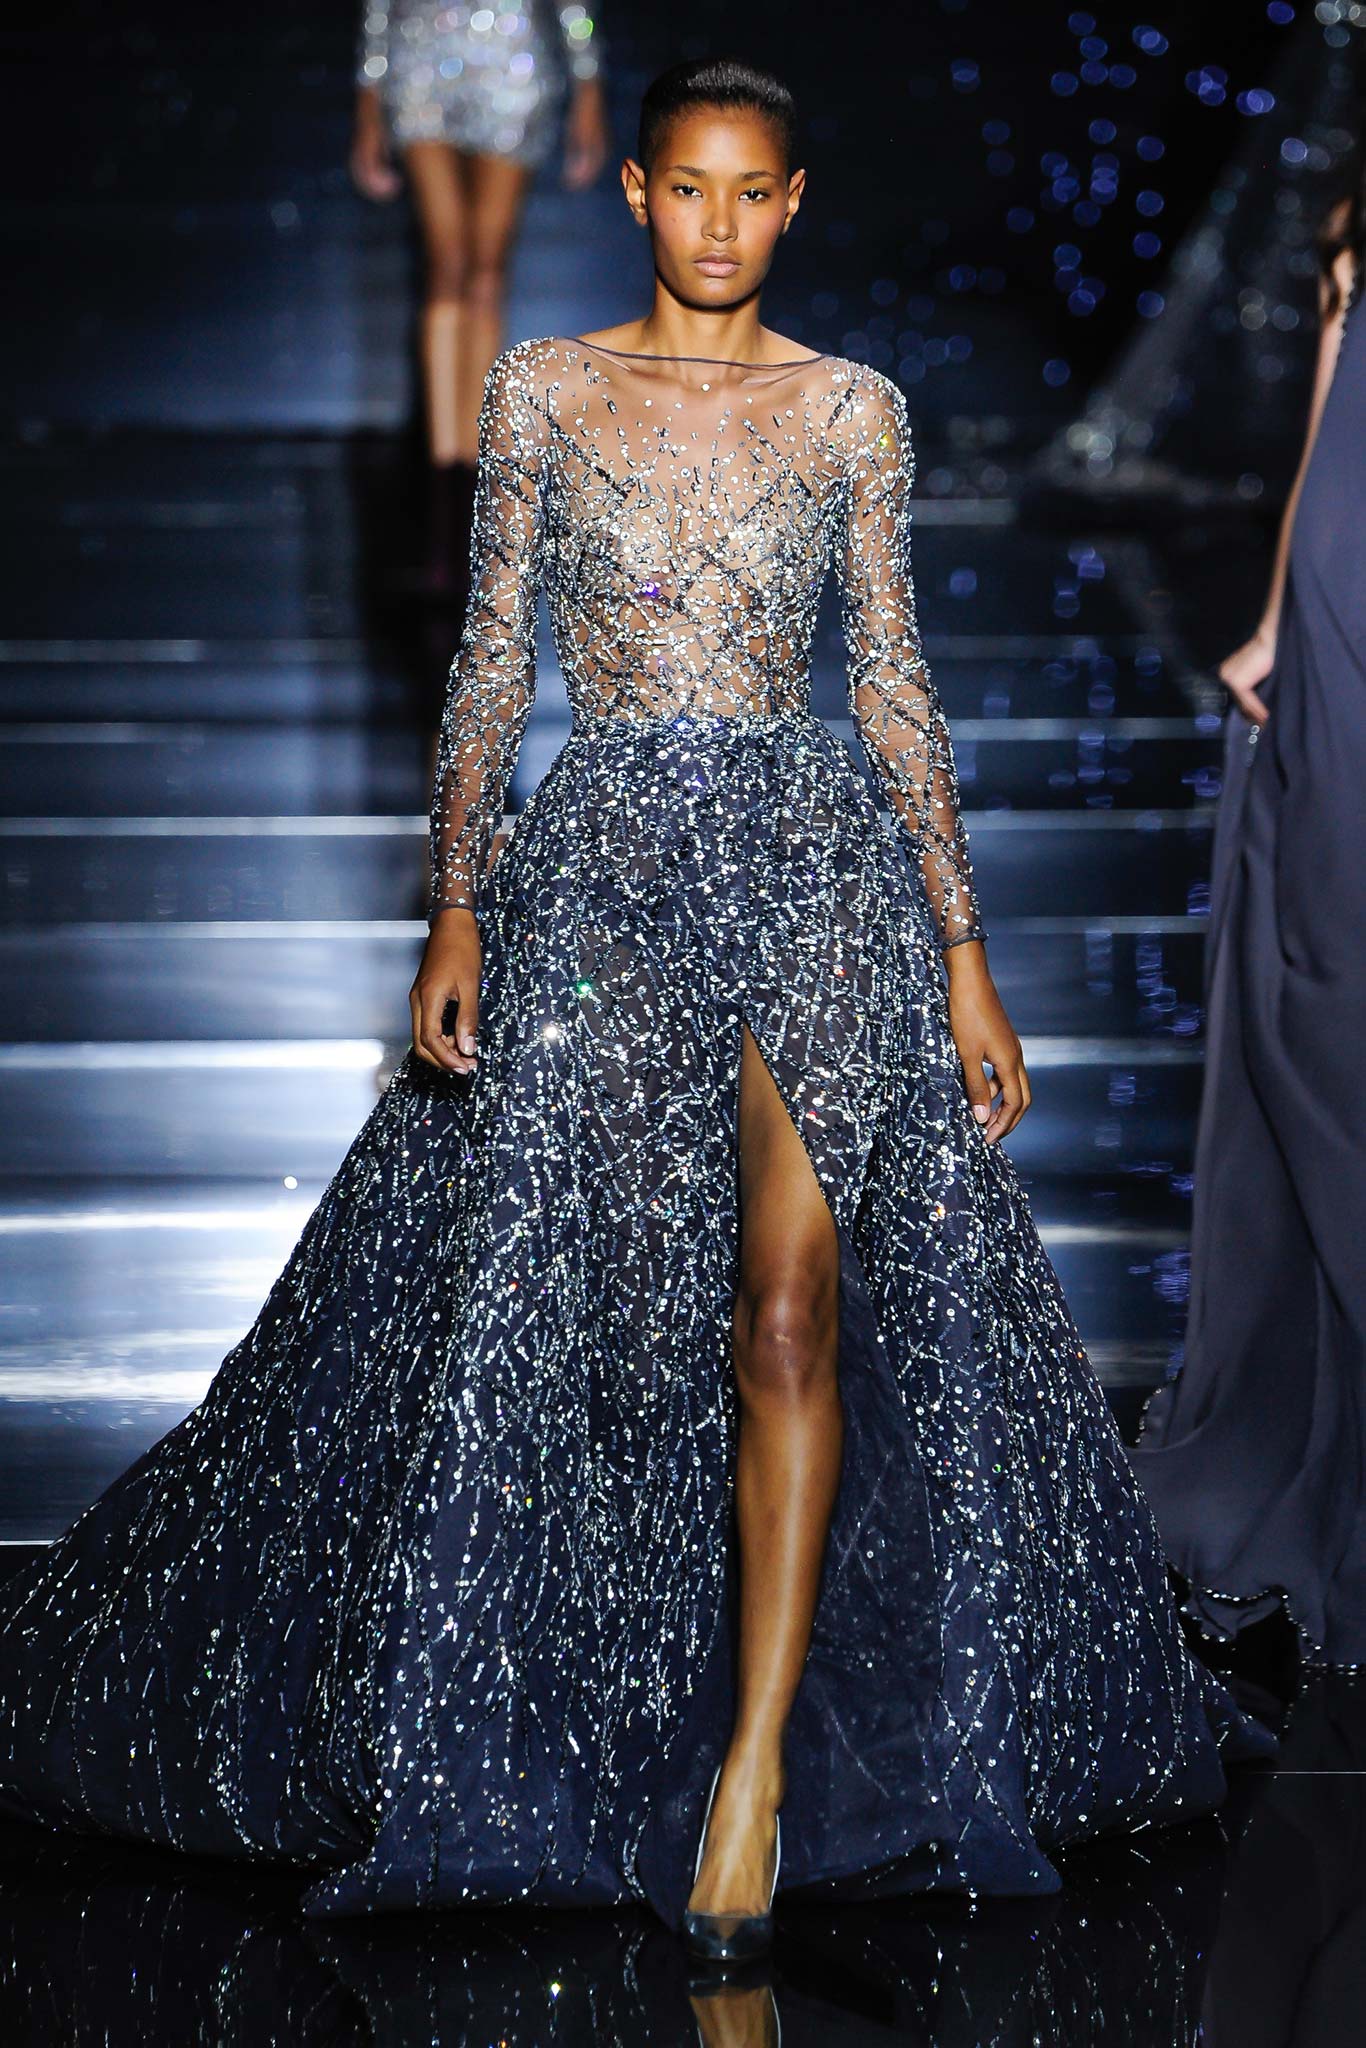 RUNWAY: Zuhair Murad Fall 2015 couture collection